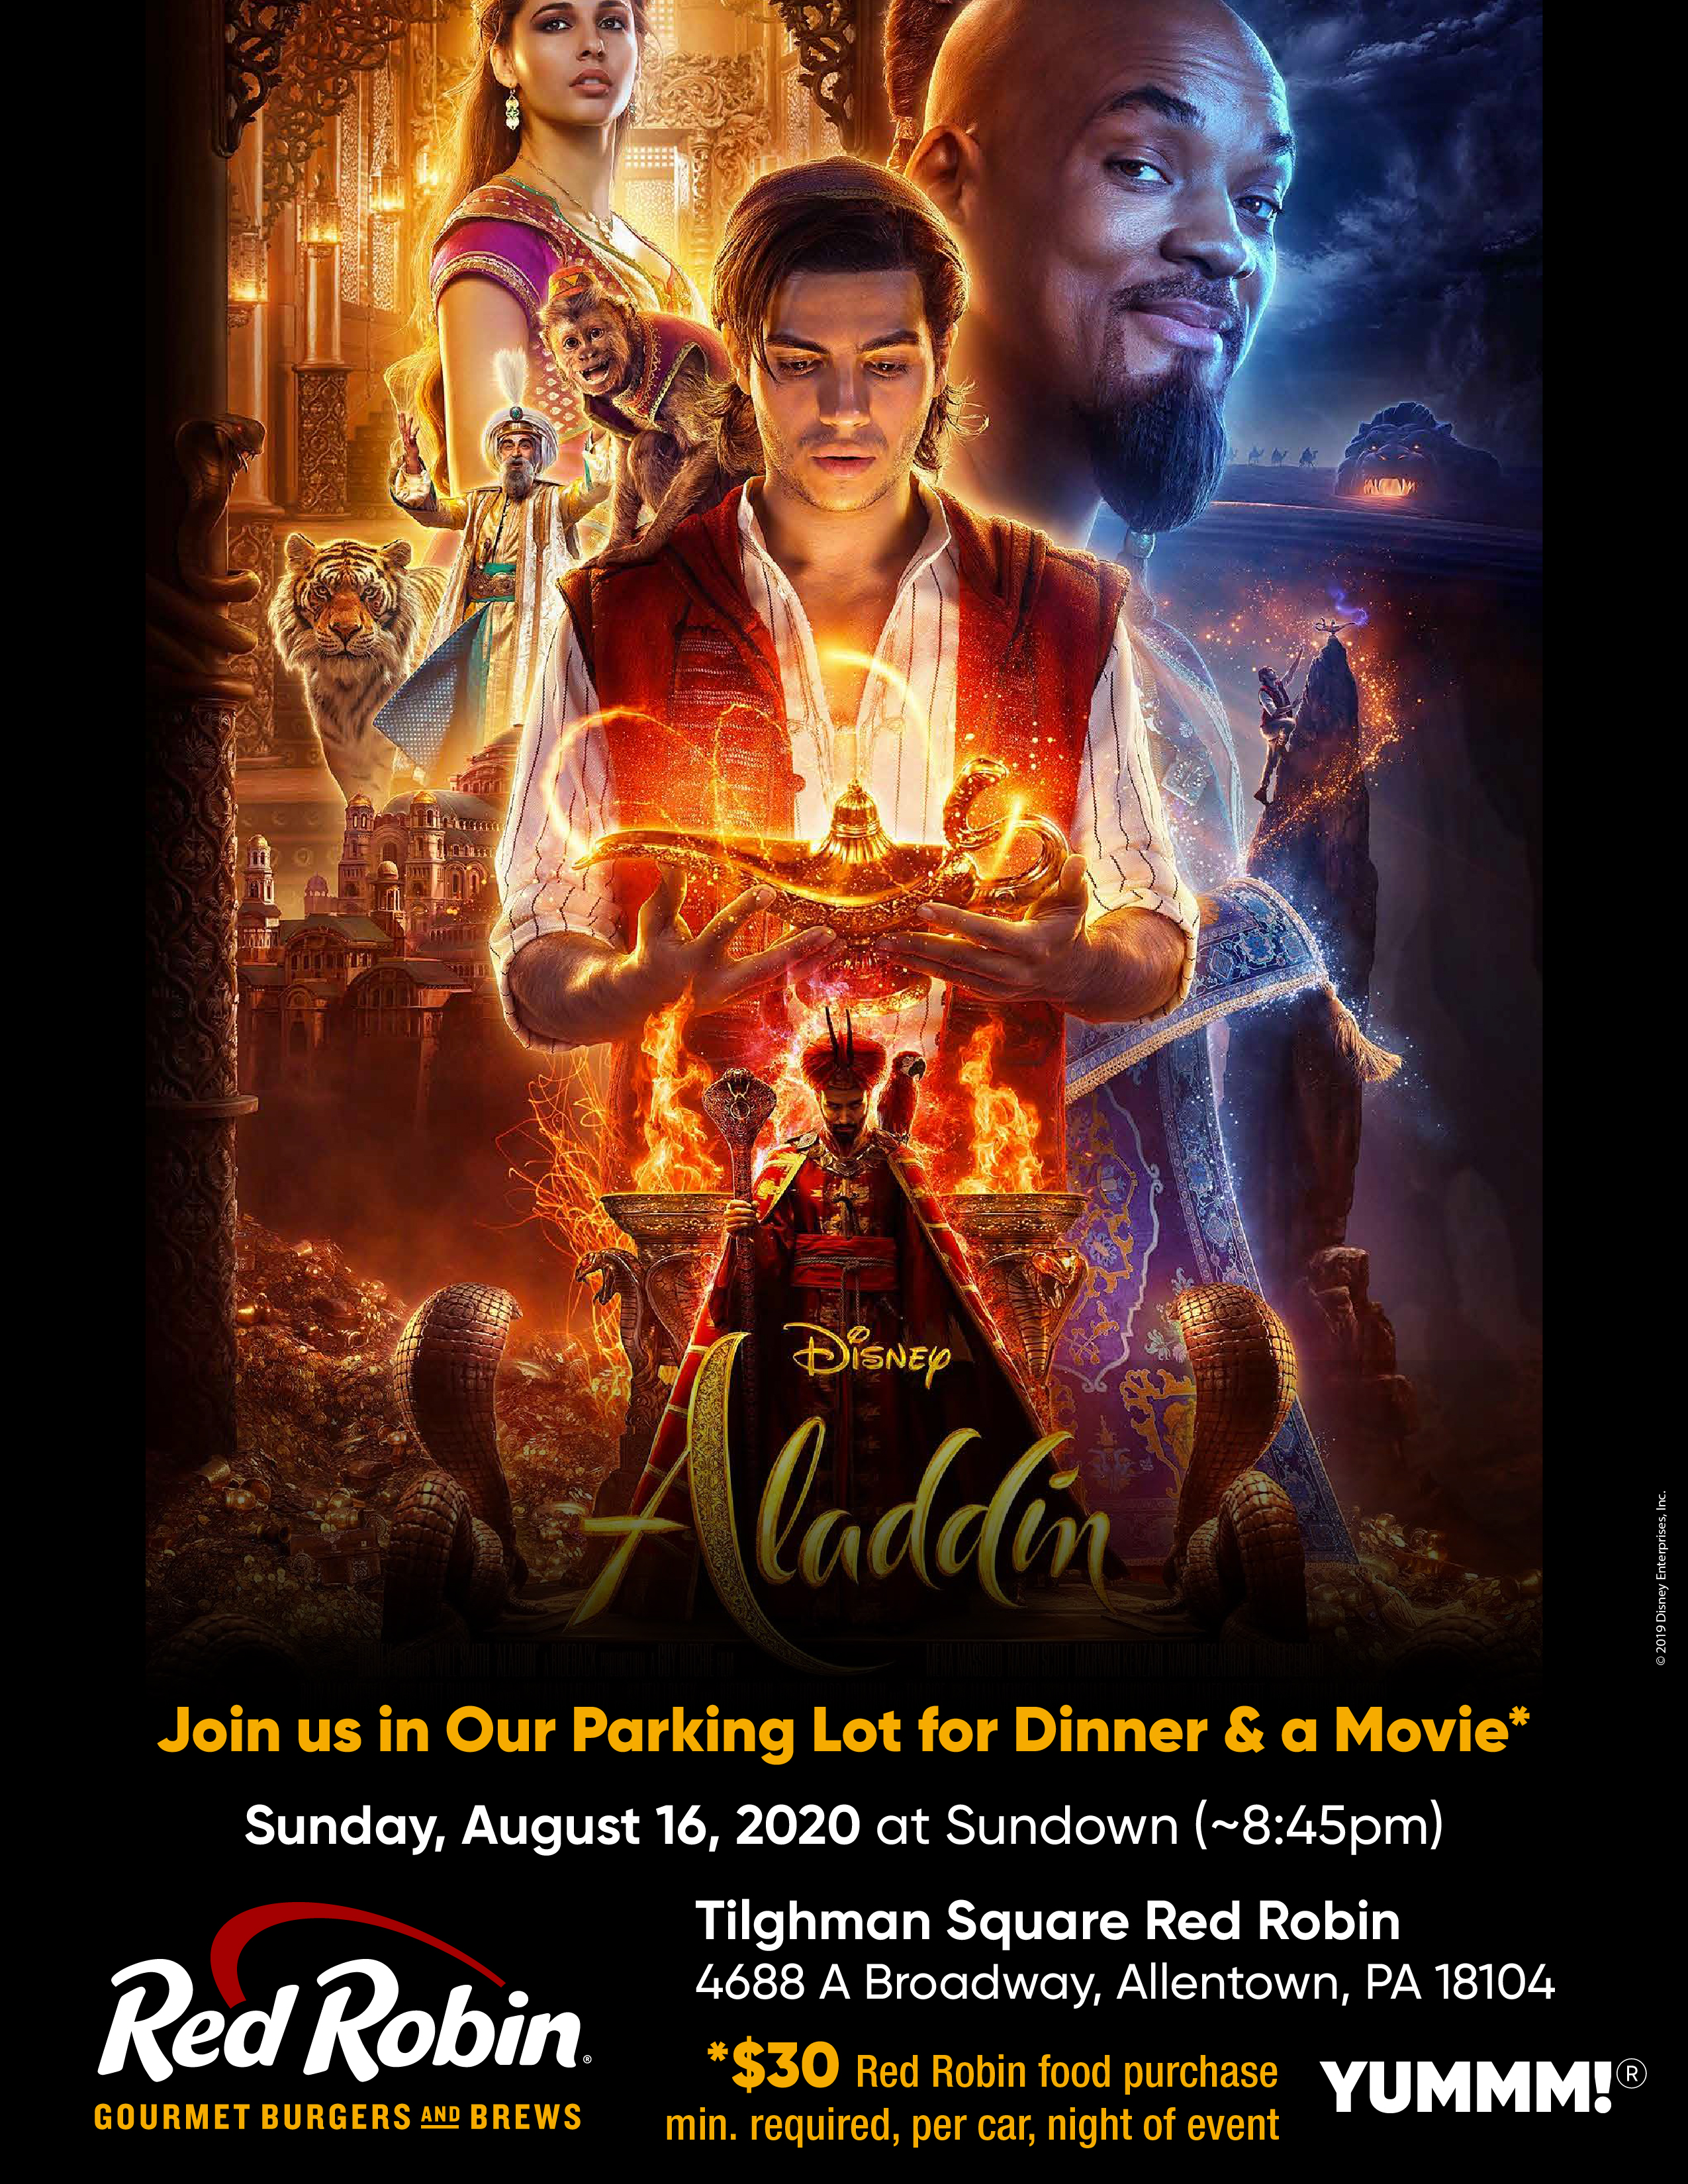 Flyer for DInner & a Movie event at the Tilghman Square Red Robin parking lot. Movie shown is 2019 Aladdin.